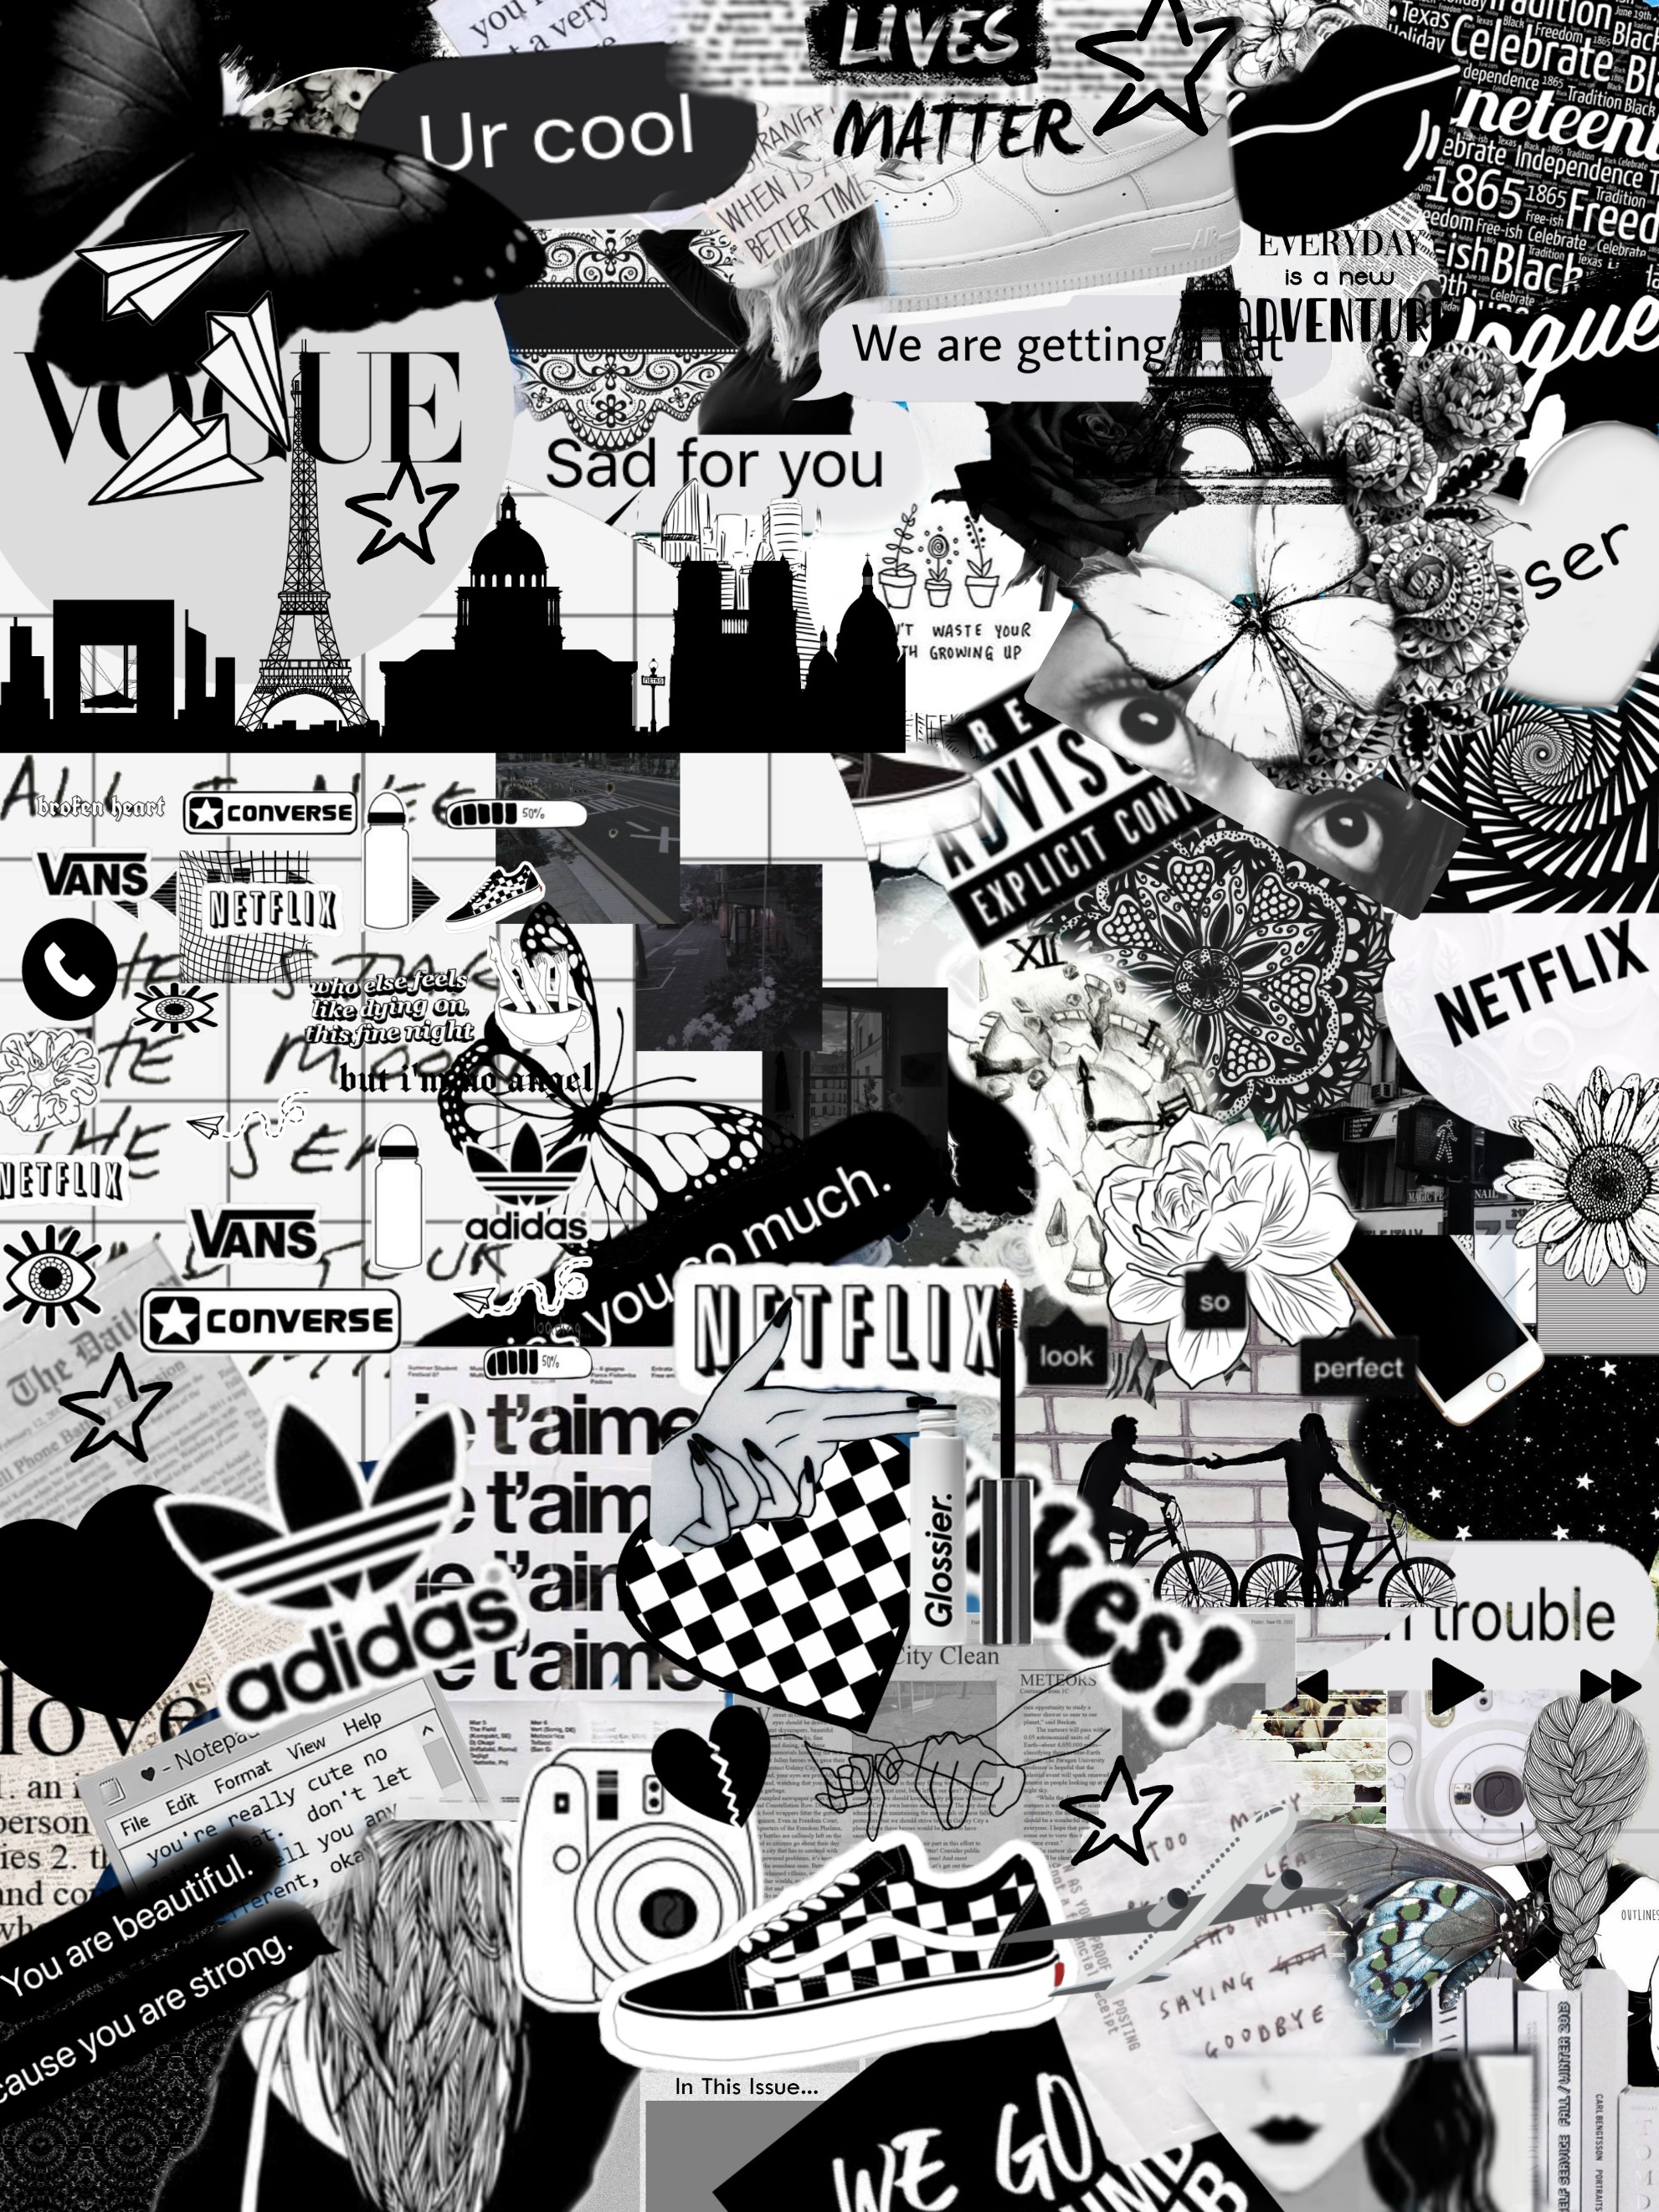 94 Picsart Black And White Aesthetic Stickers | IwannaFile